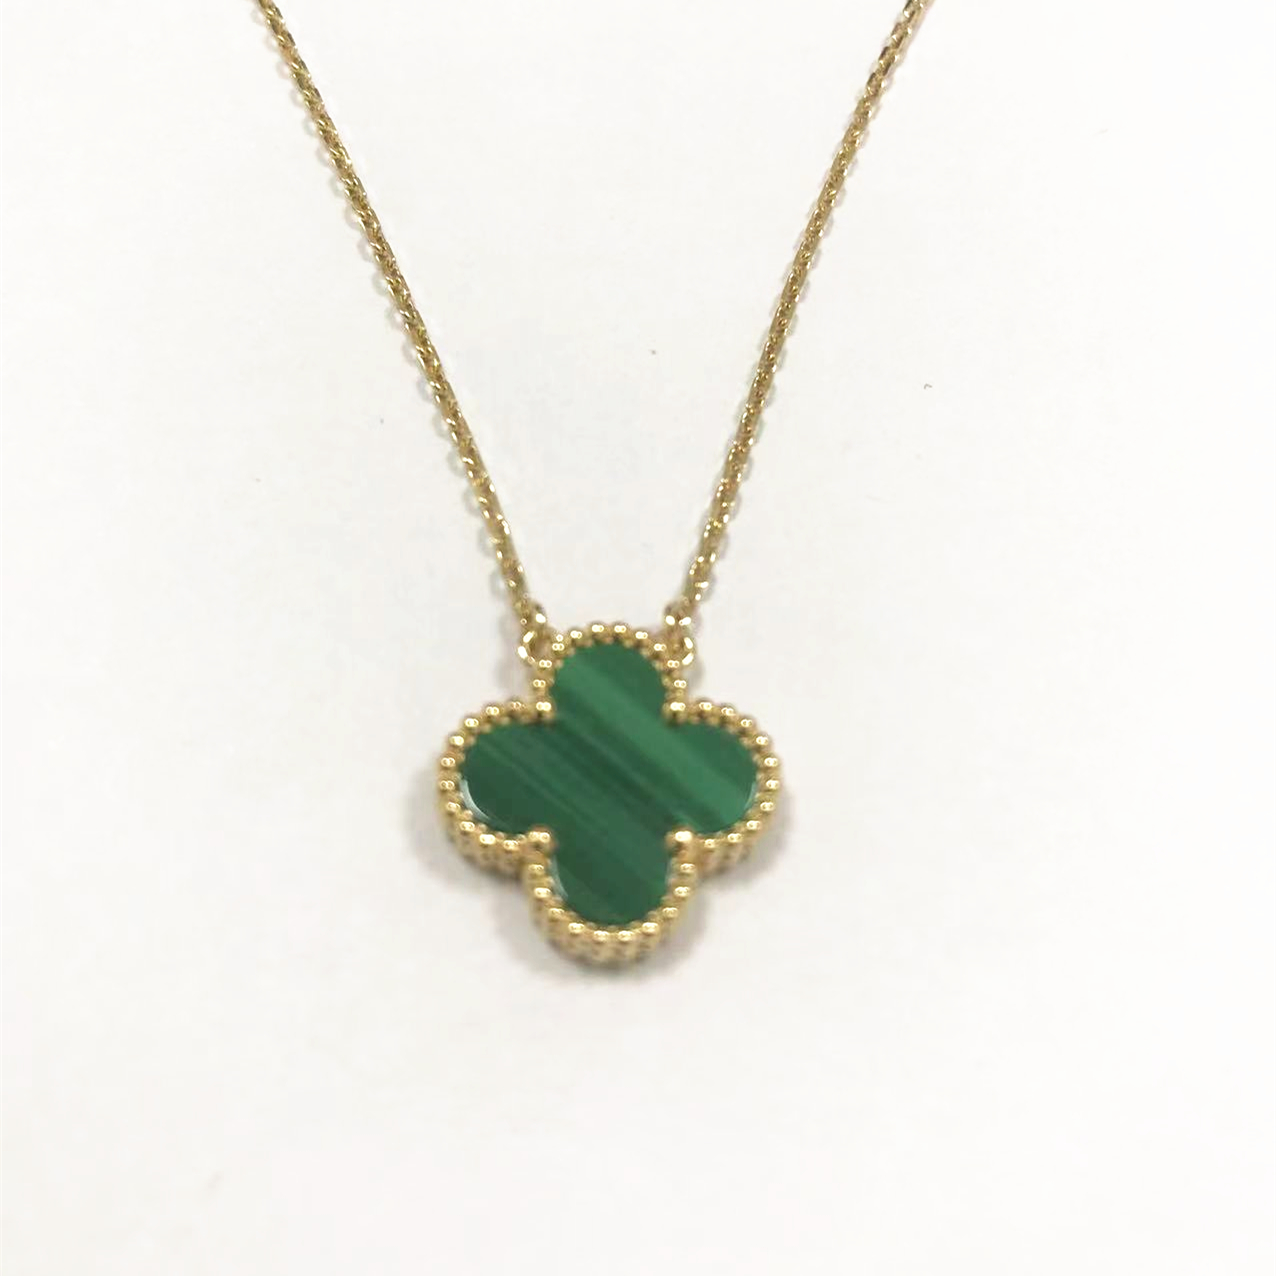 Vintage Van Cleef Fake Alhambra Gold Necklace Malachite Pendant Vintage Alhambra pendant, 18K yellow gold, malachite. REFERENCE: VCARO9VA00 STONE: Malachite: 1 stone CLASP: Hallmark clasp, small model in 18K yellow gold SIZE: Chain length: 16.54 inches